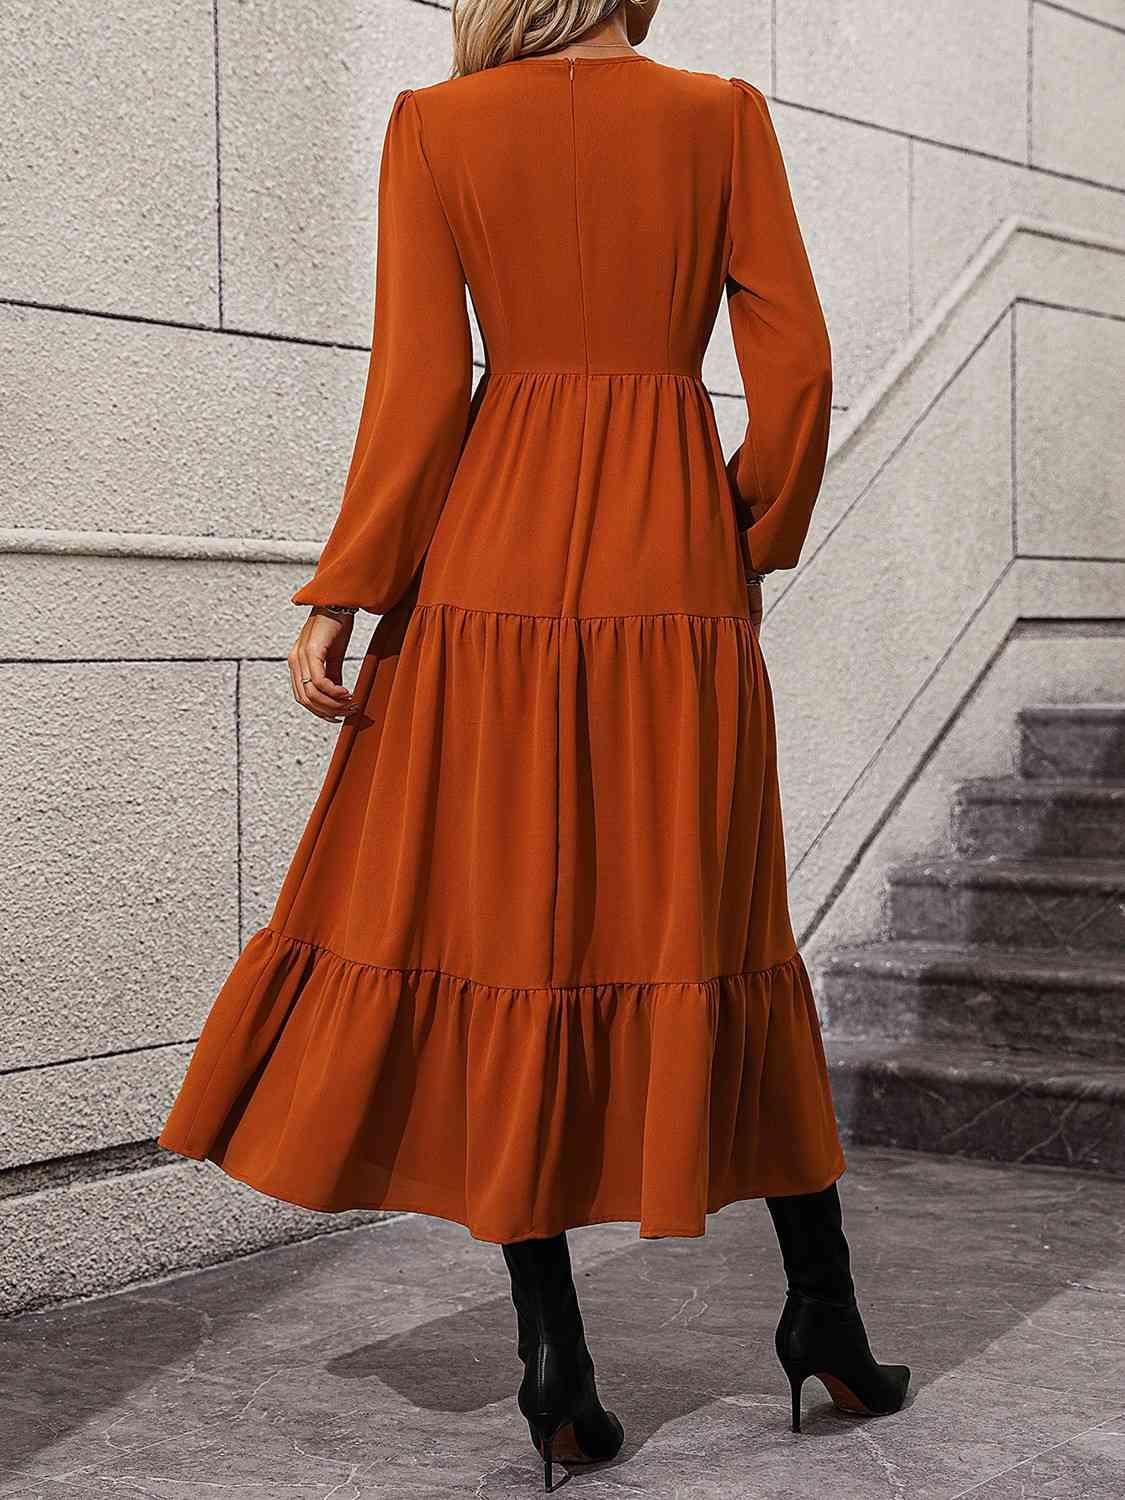 a woman wearing an orange dress and black boots